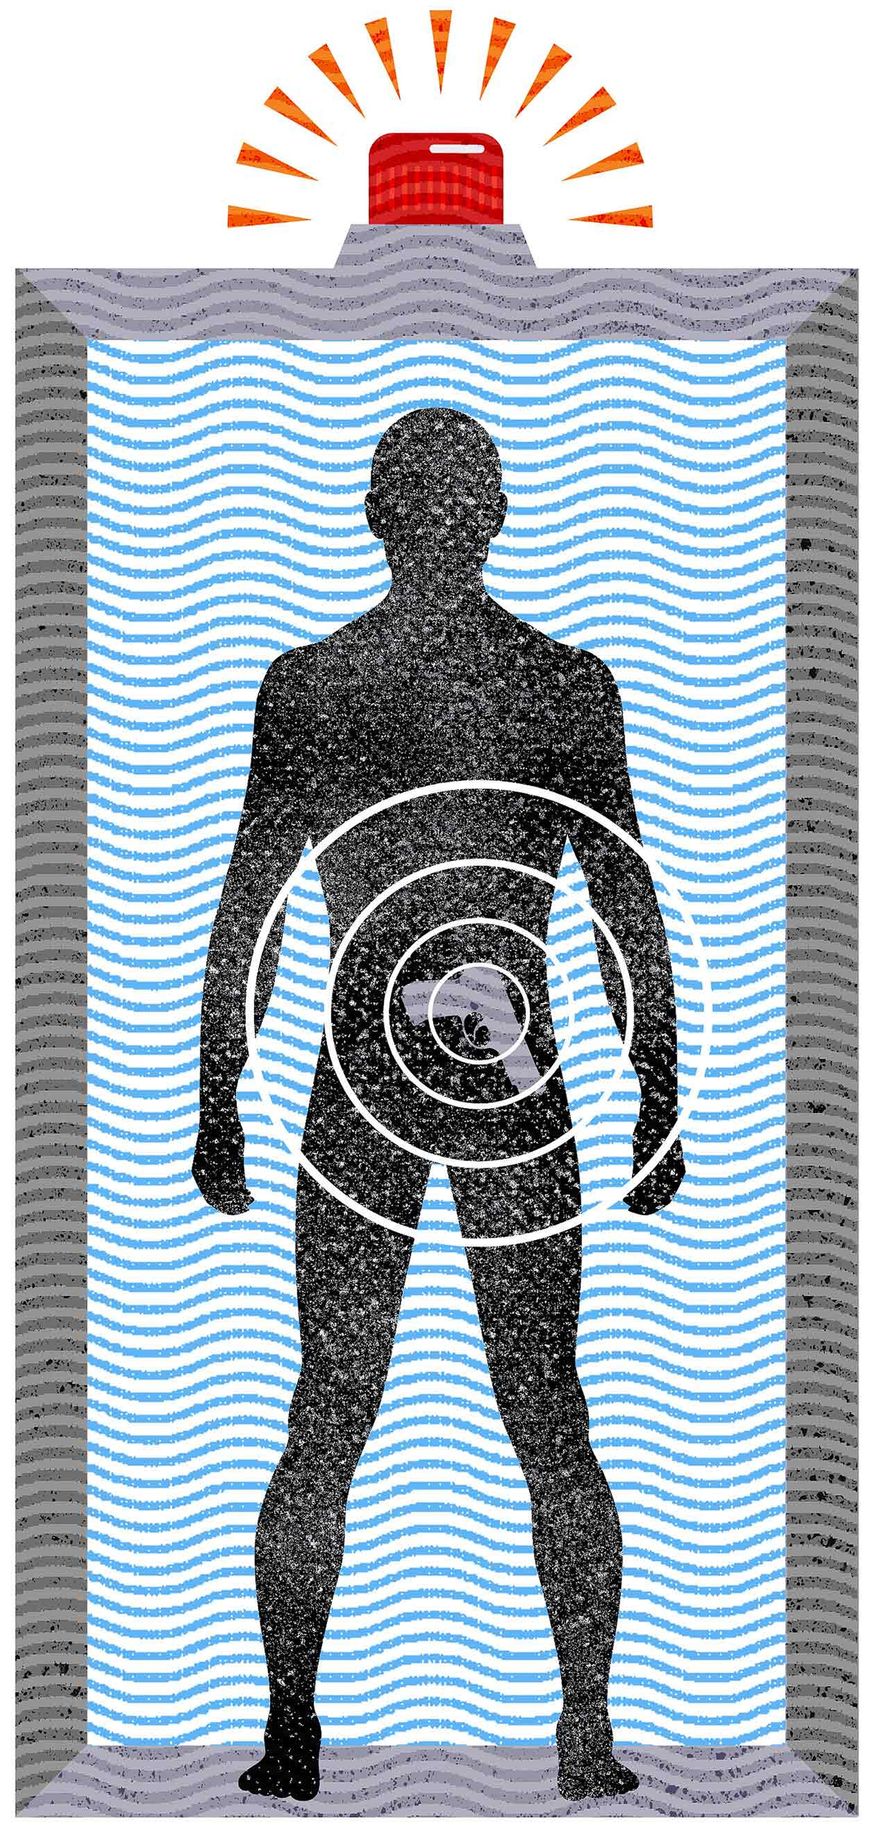 Additional Security versus Gun Control Illustration by Greg Groesch/The Washington Times